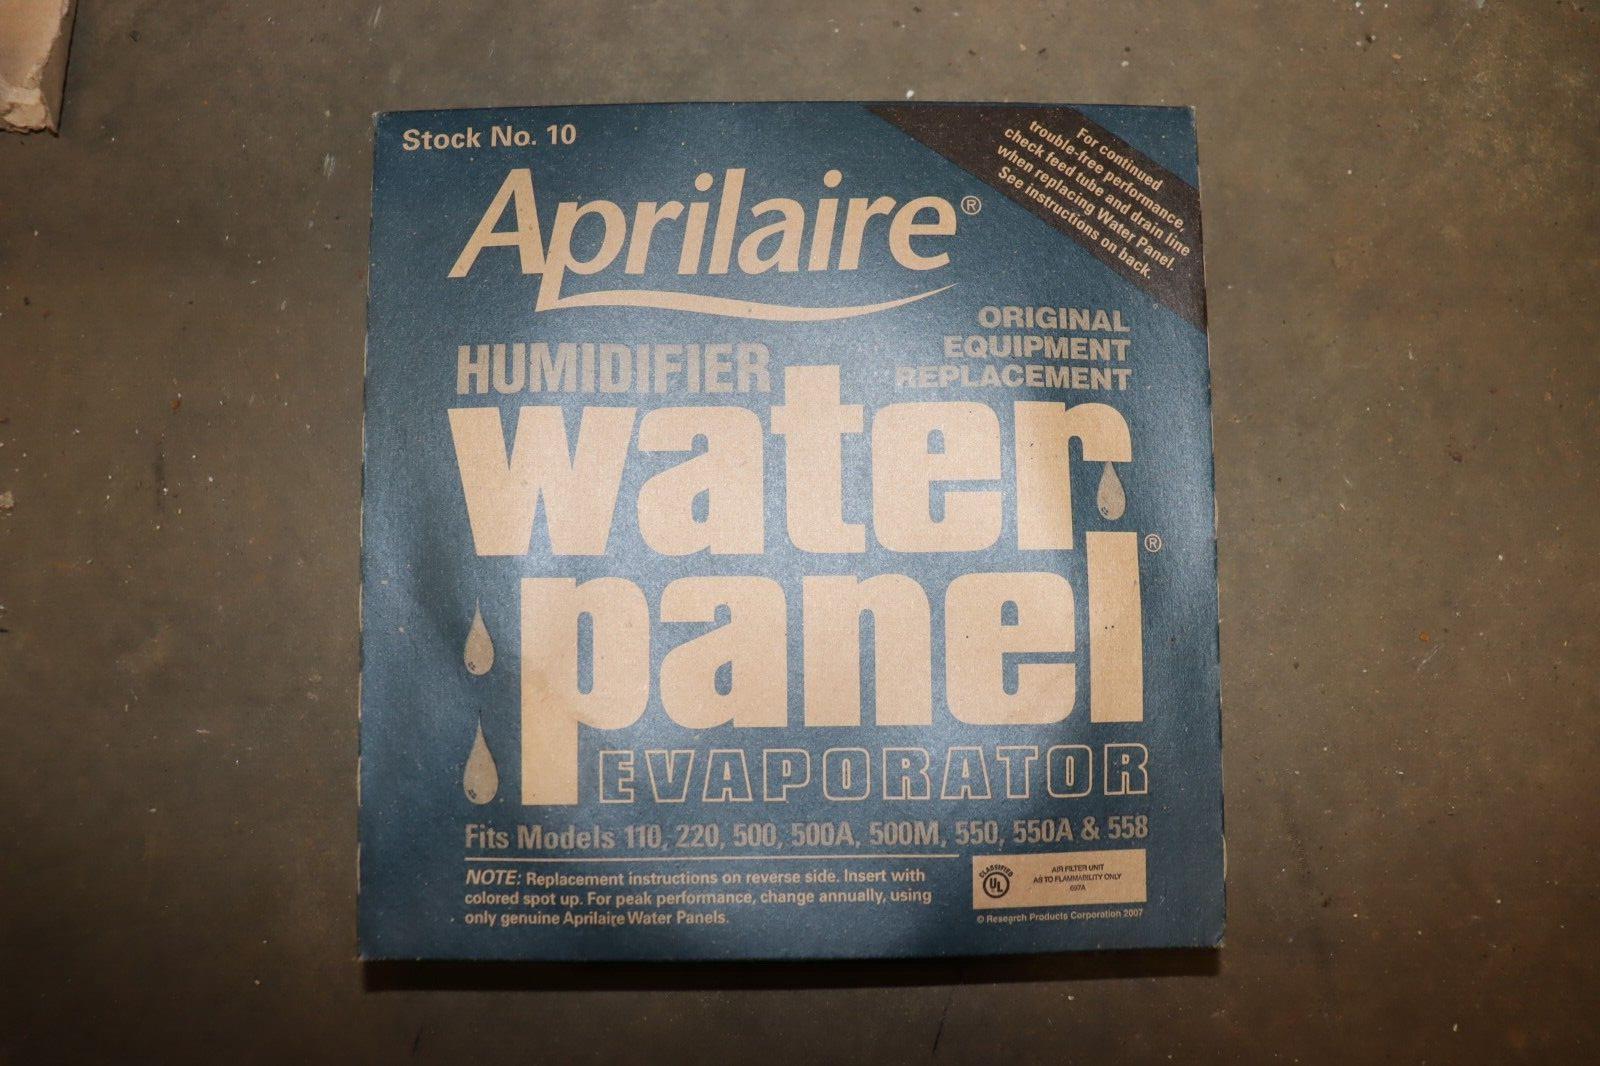 Humidifier Pad Aprilaire Water Panel Stock Number 10 Size 10 x 10 x 2